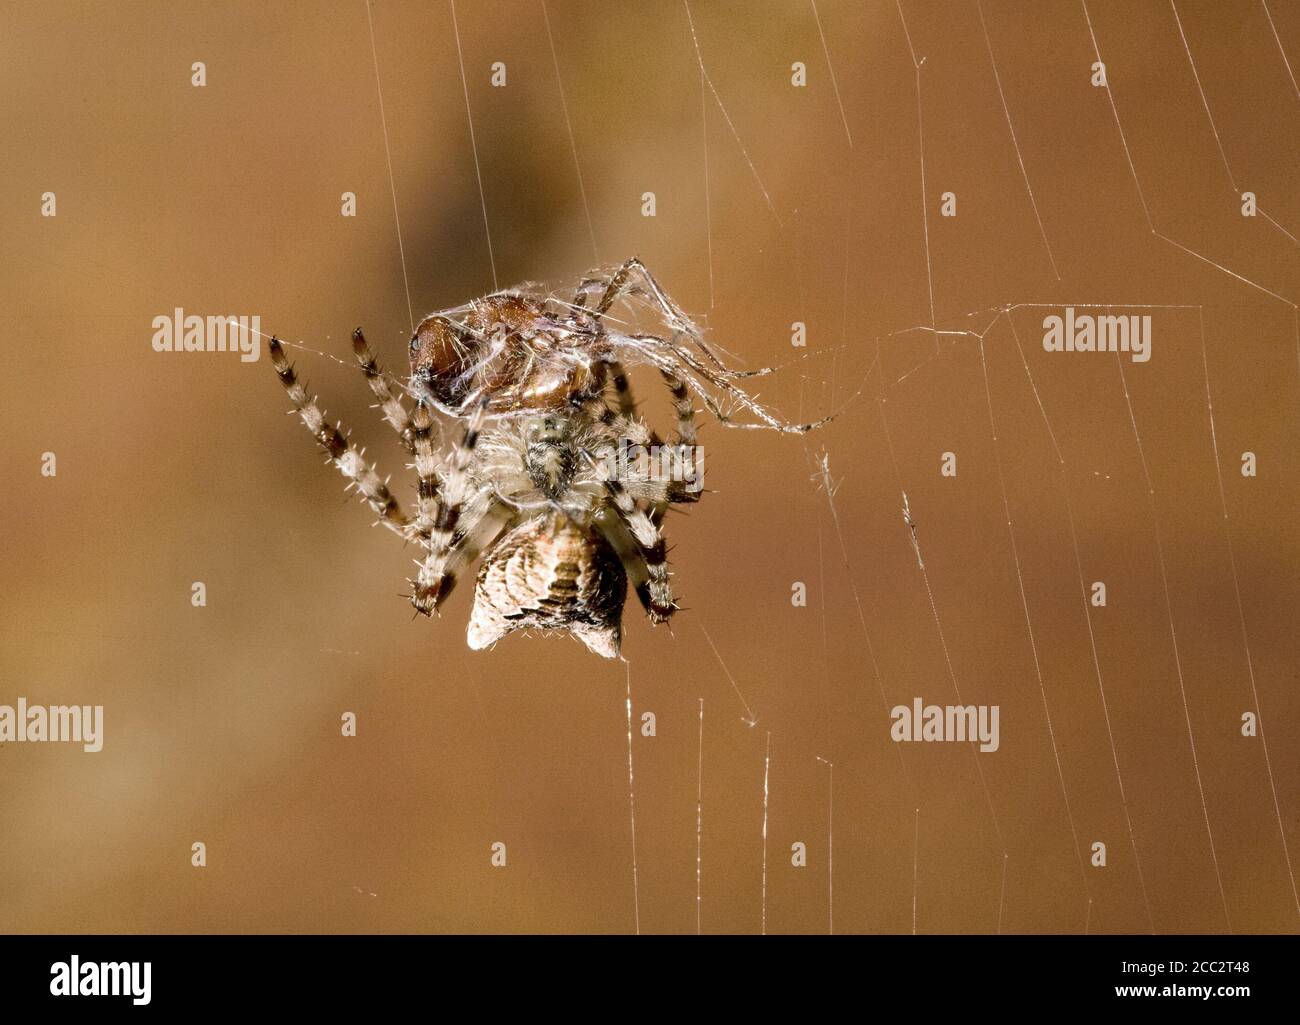 A Cross Orbweaver spider, raneus diadematus, hanging in its web and wrapping a red ant it has bitten in silk, on the side of a wooden house in central Stock Photo